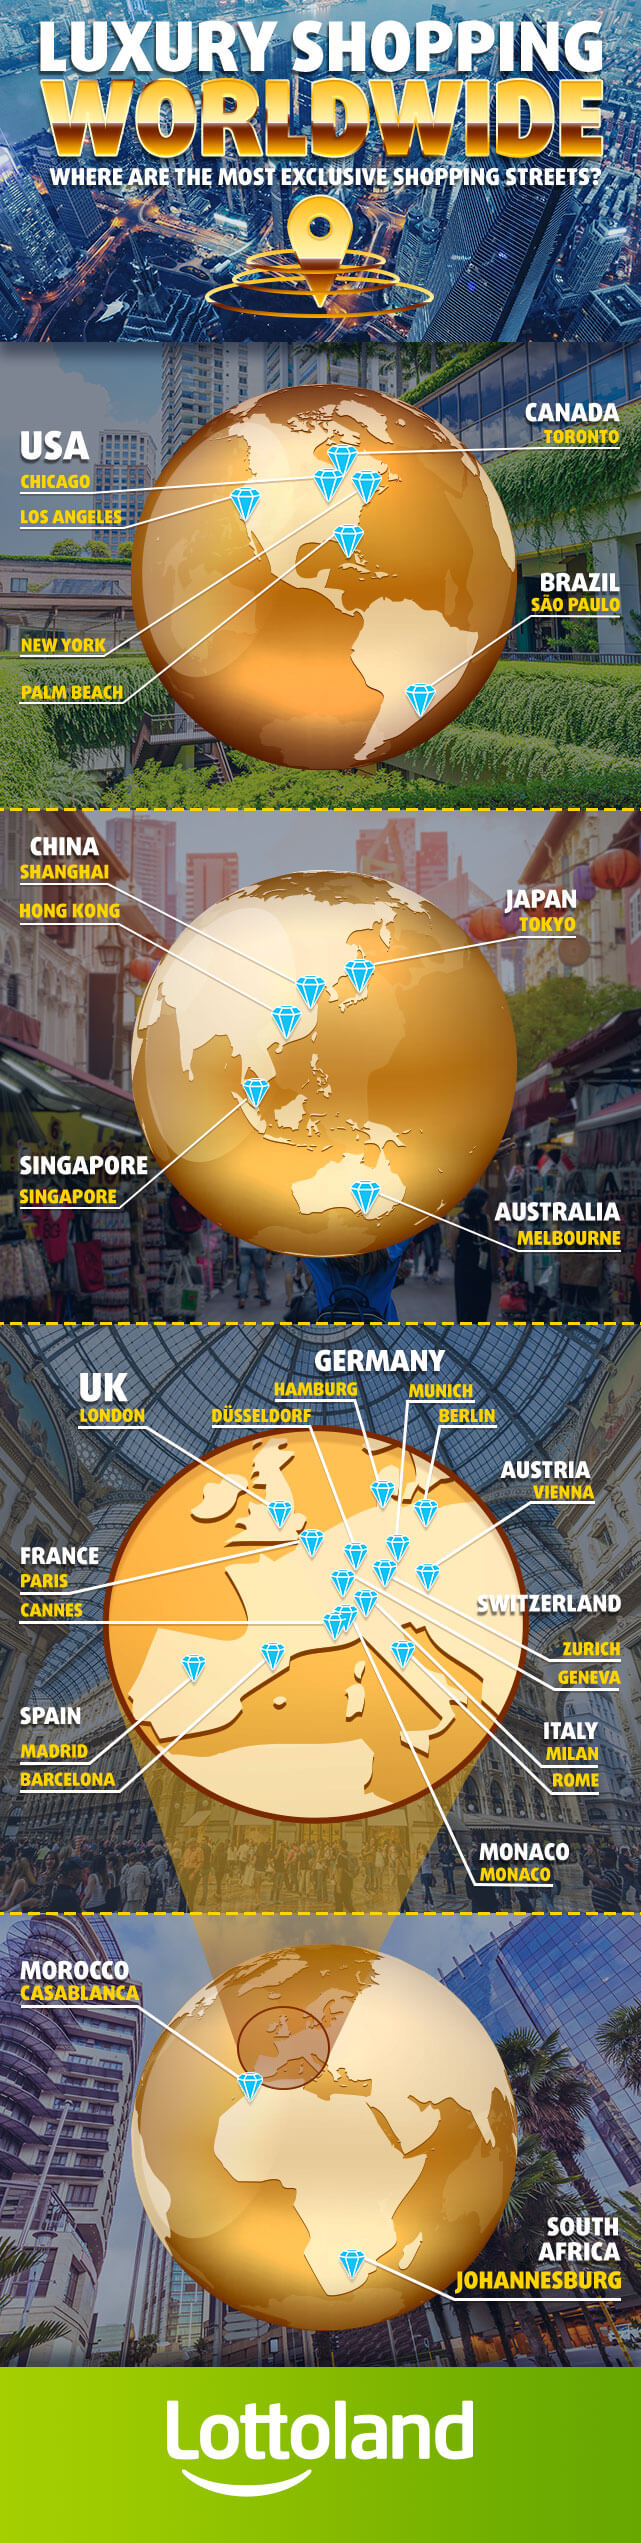 Infographic showing luxury shopping streets around the world